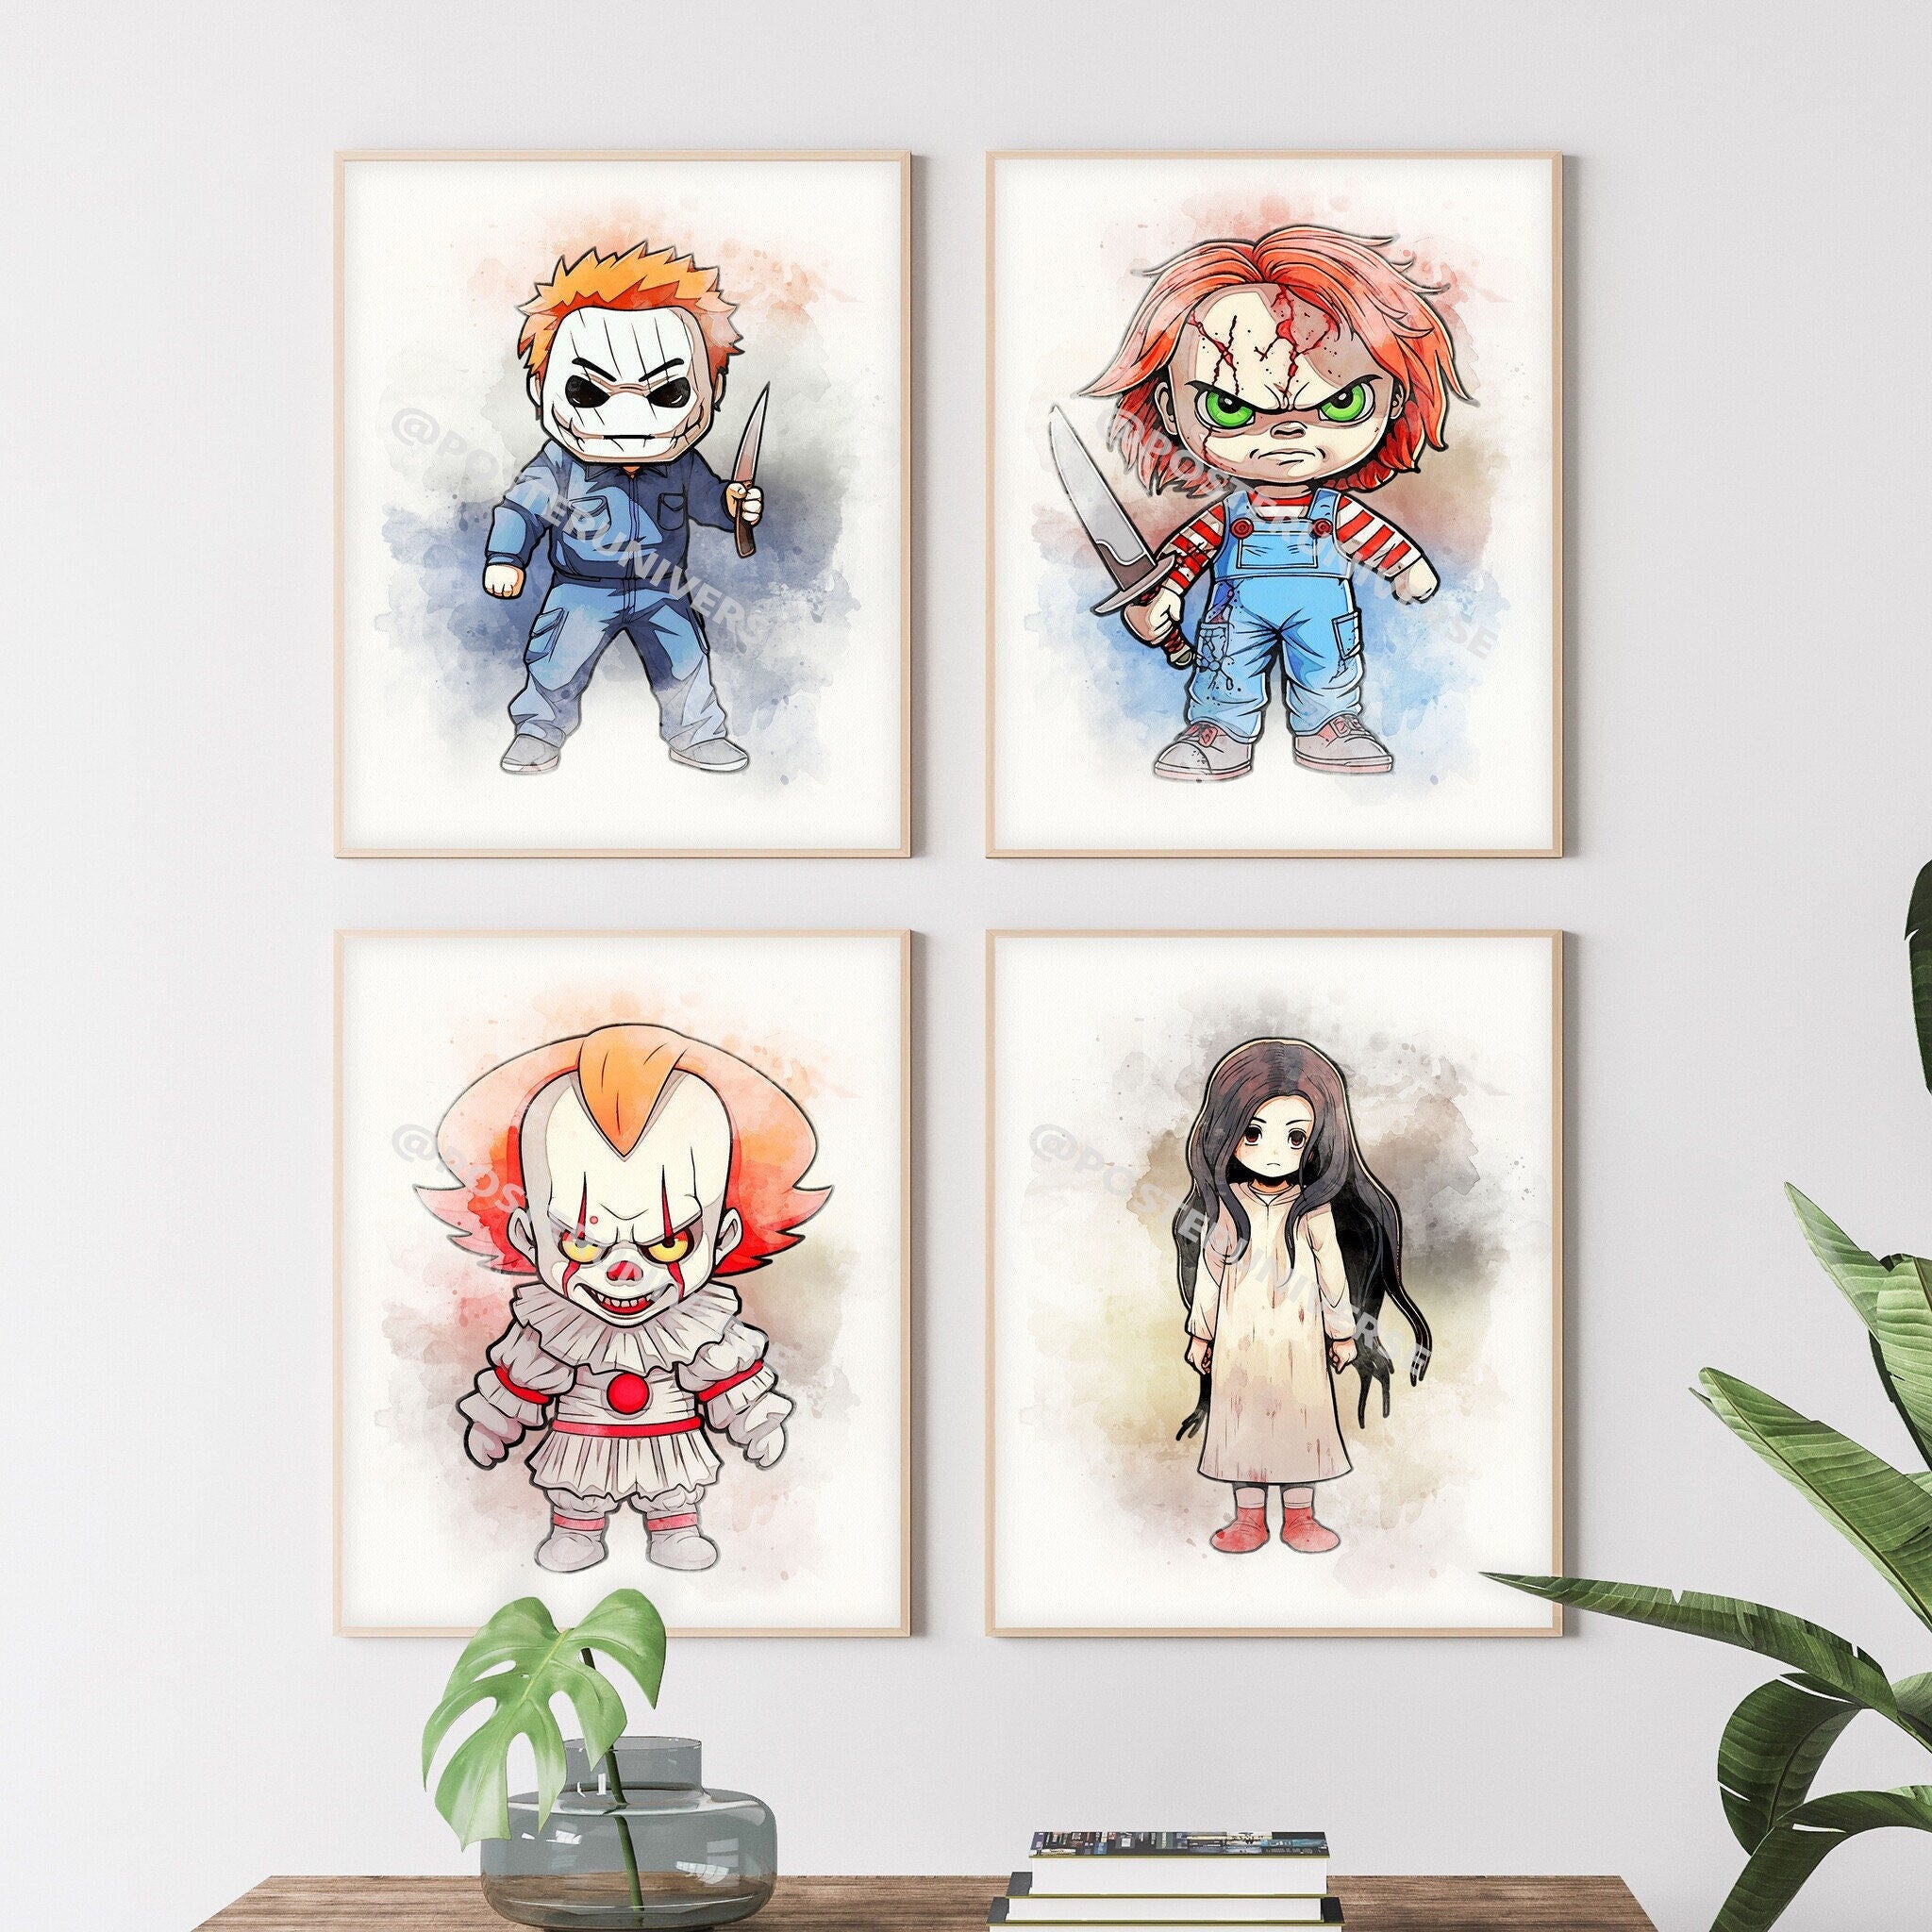 Popular Horror Movies Characters - Horror Gifts, Horror Movie Wall Art, Printable Poster Set, Watercolor Painting, Chucky, Michael Myers